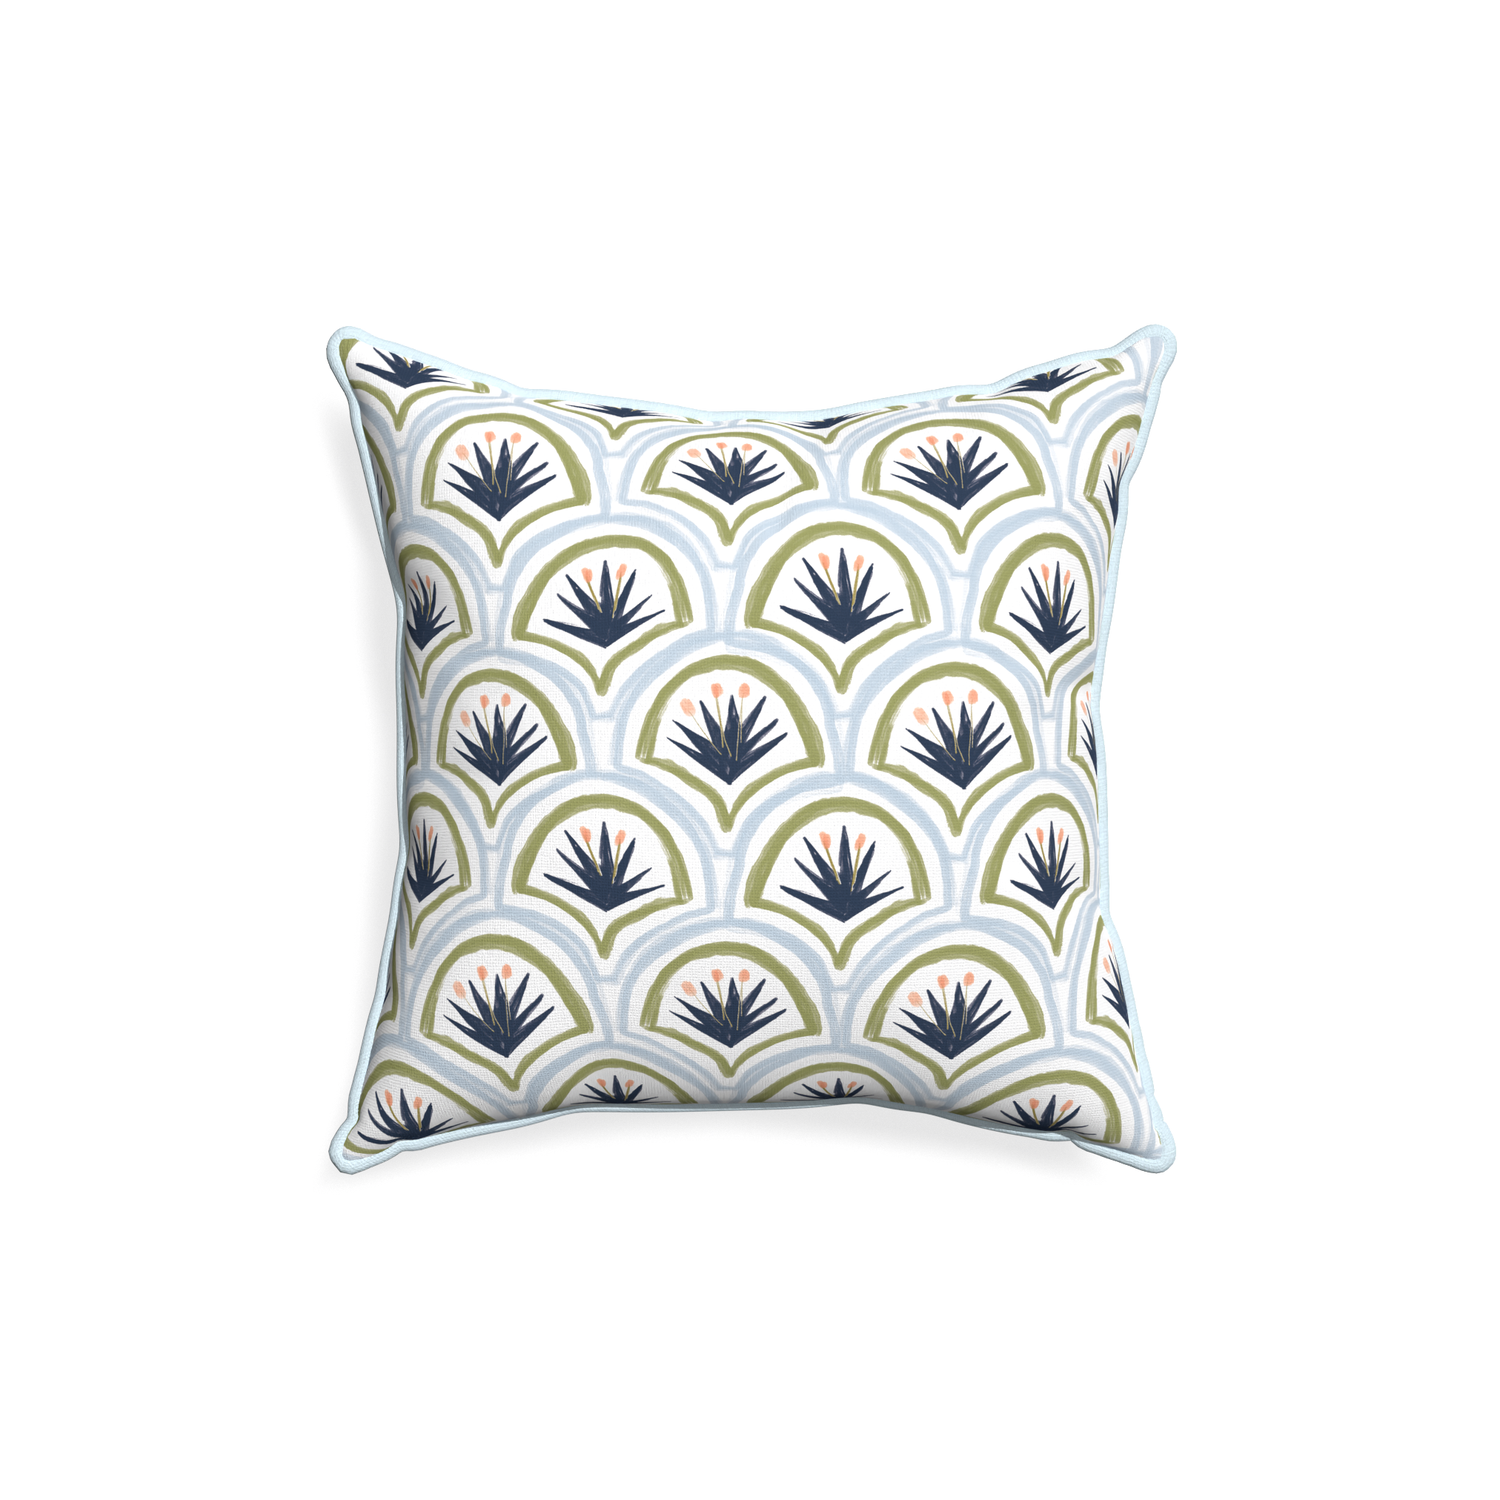 18-square thatcher midnight custom art deco palm patternpillow with powder piping on white background